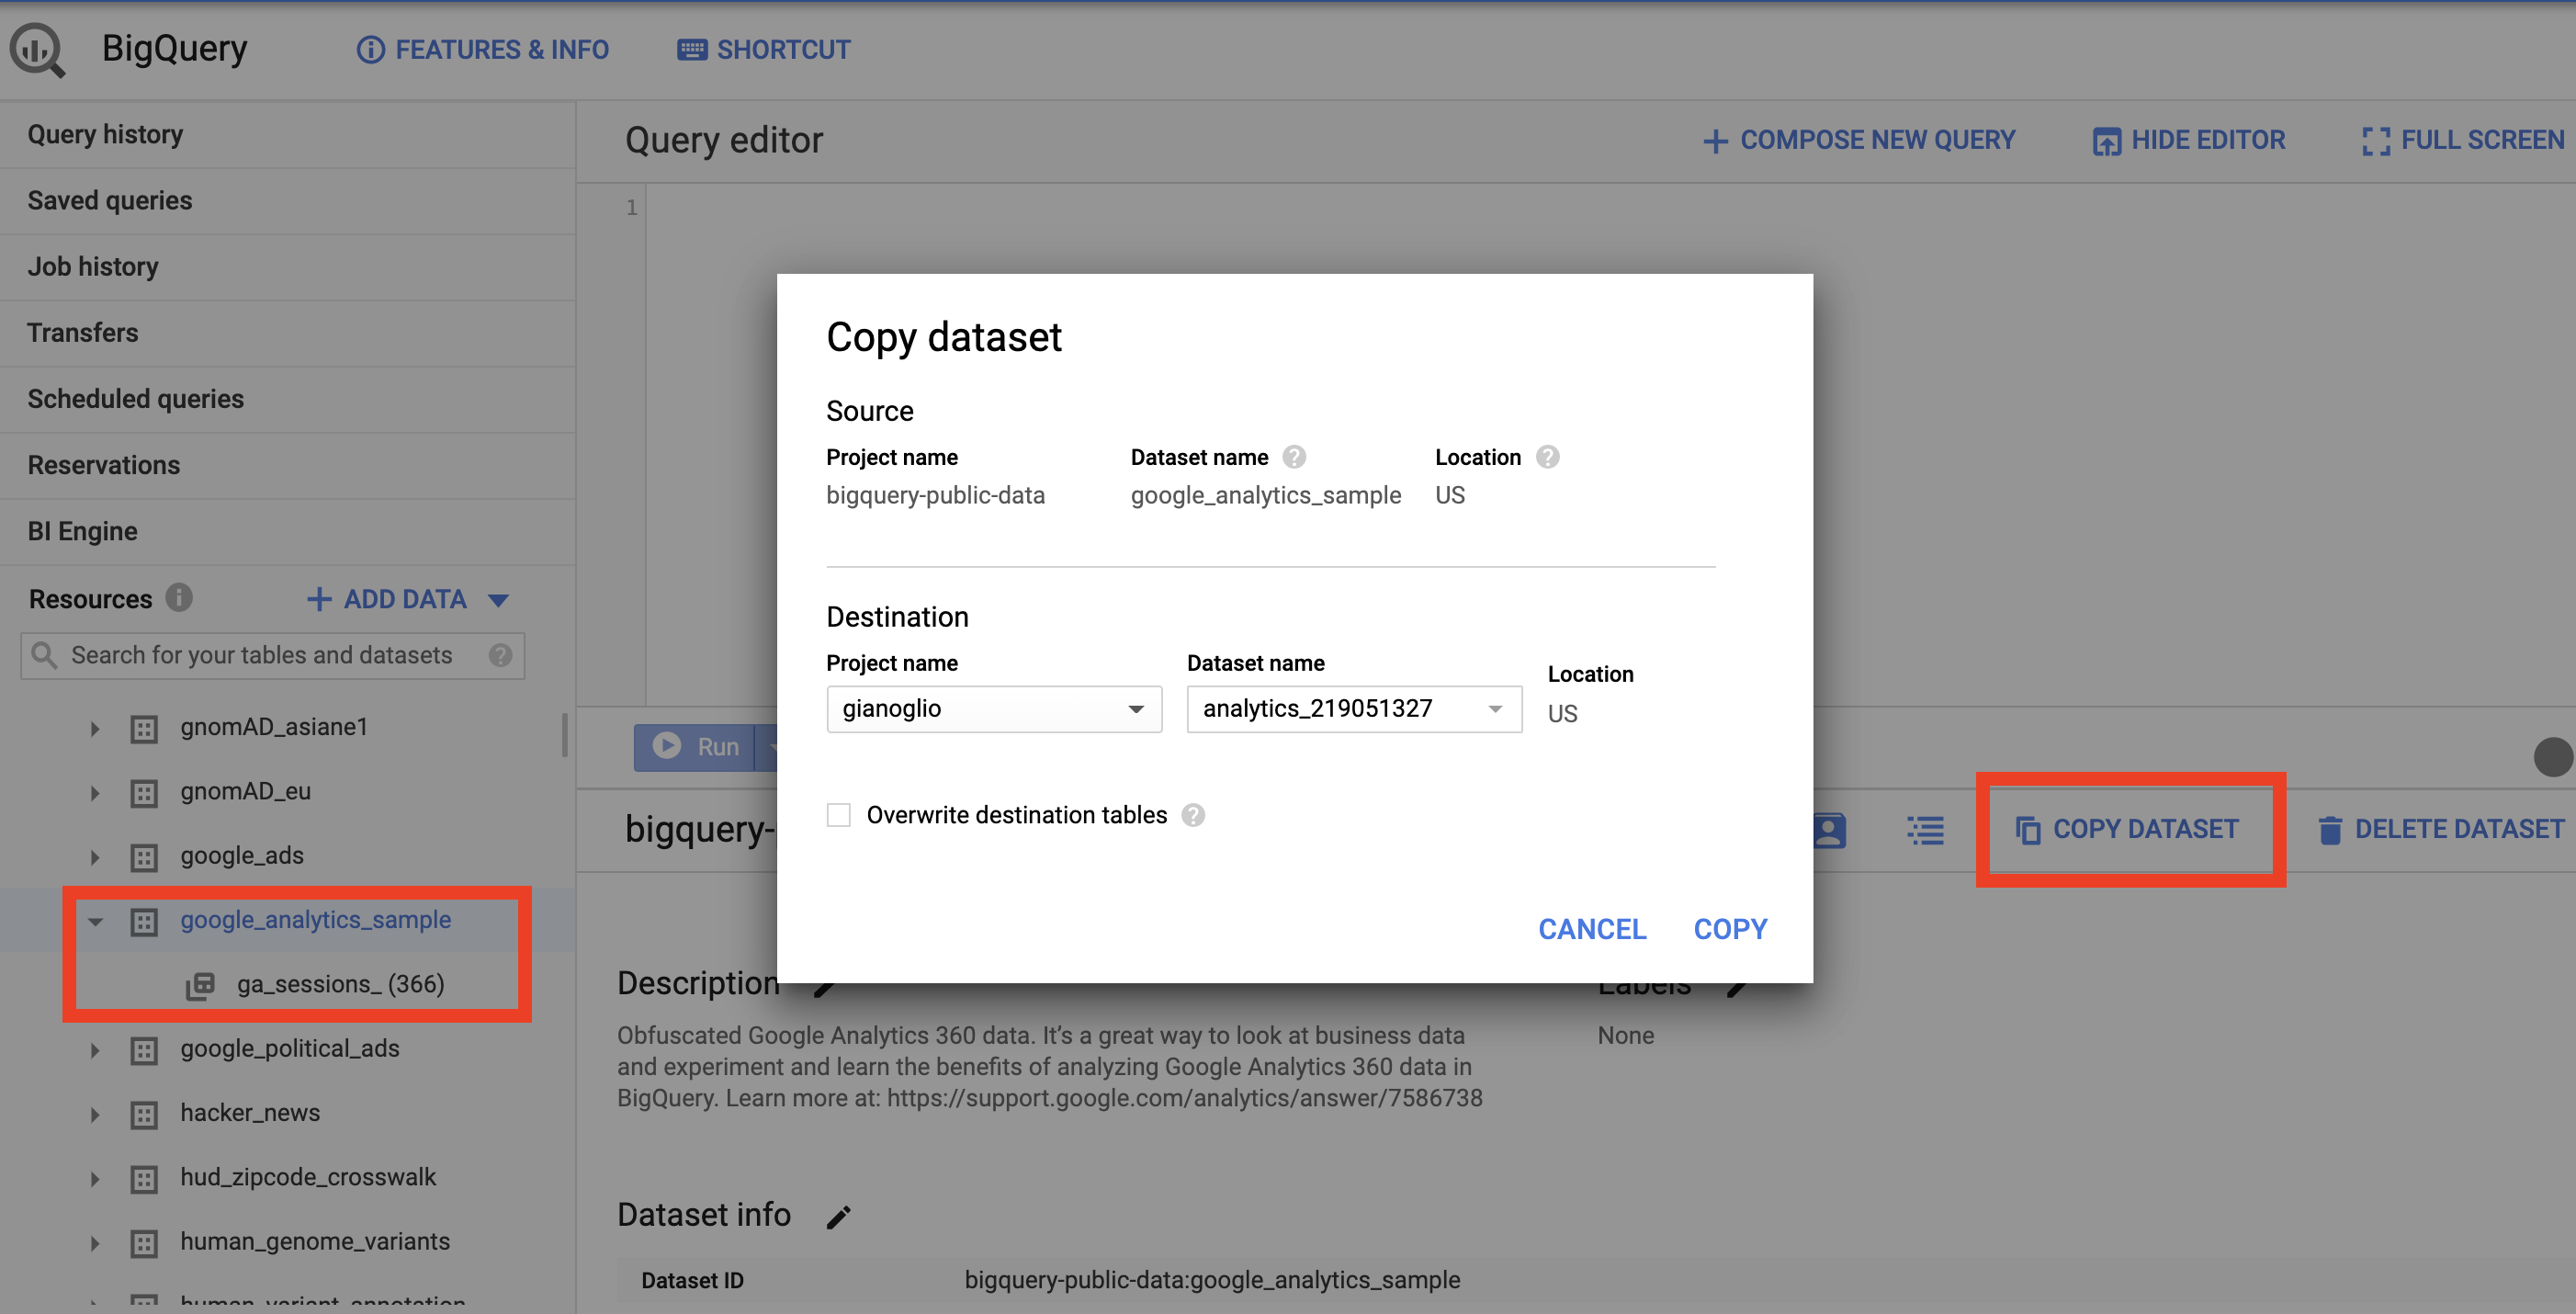 Copy Dataset in the BigQuery user interface.